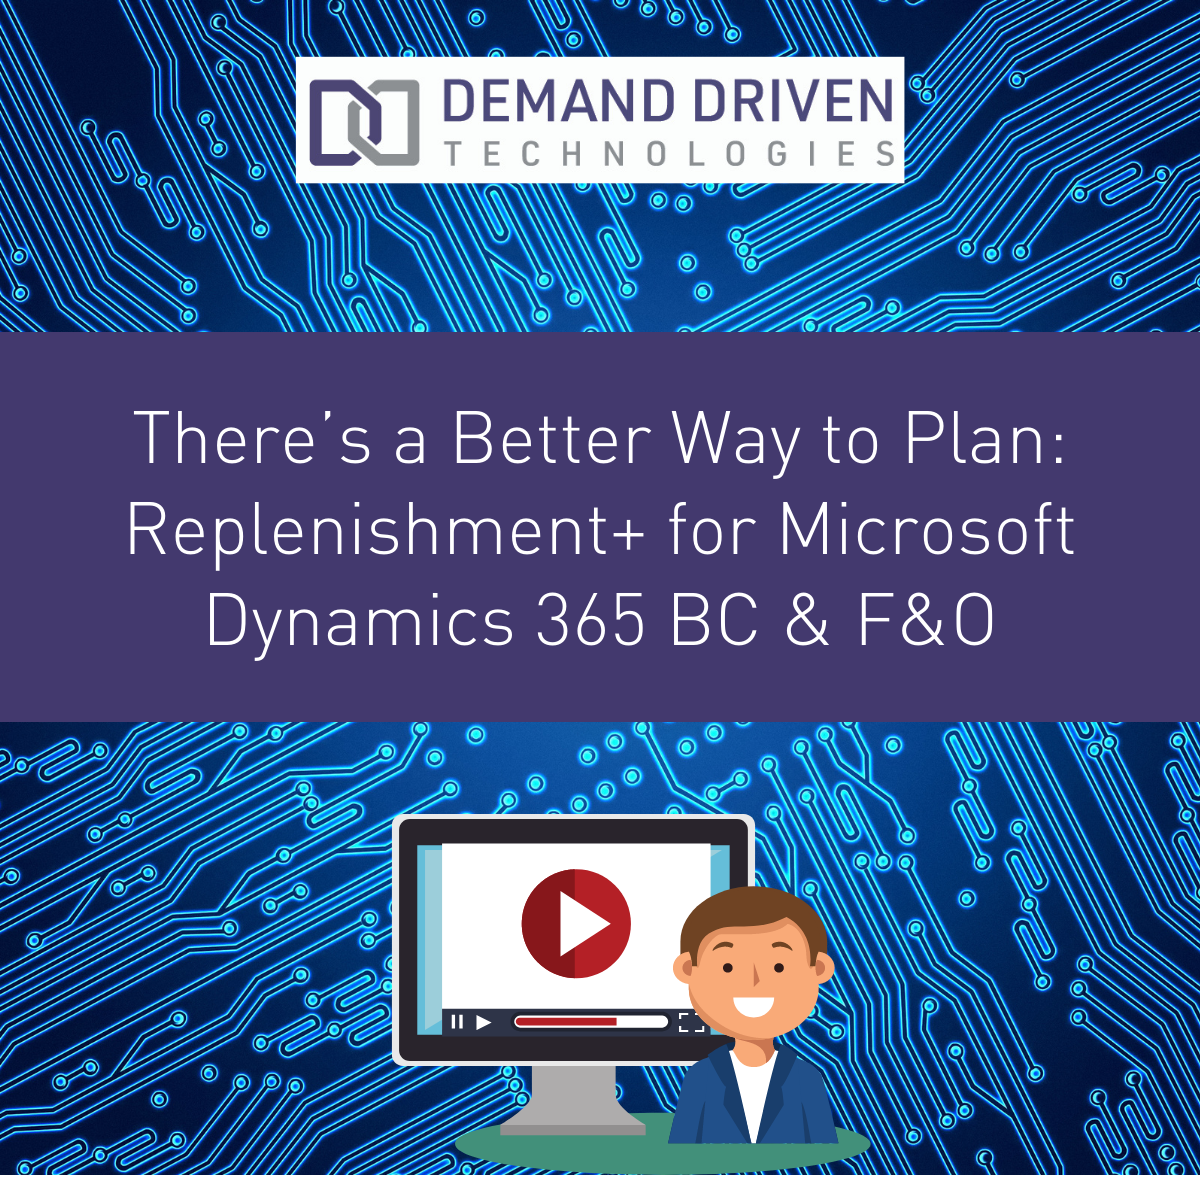 There’s a Better Way to Plan: Replenishment+ for Microsoft Dynamics 365 BC & F&O